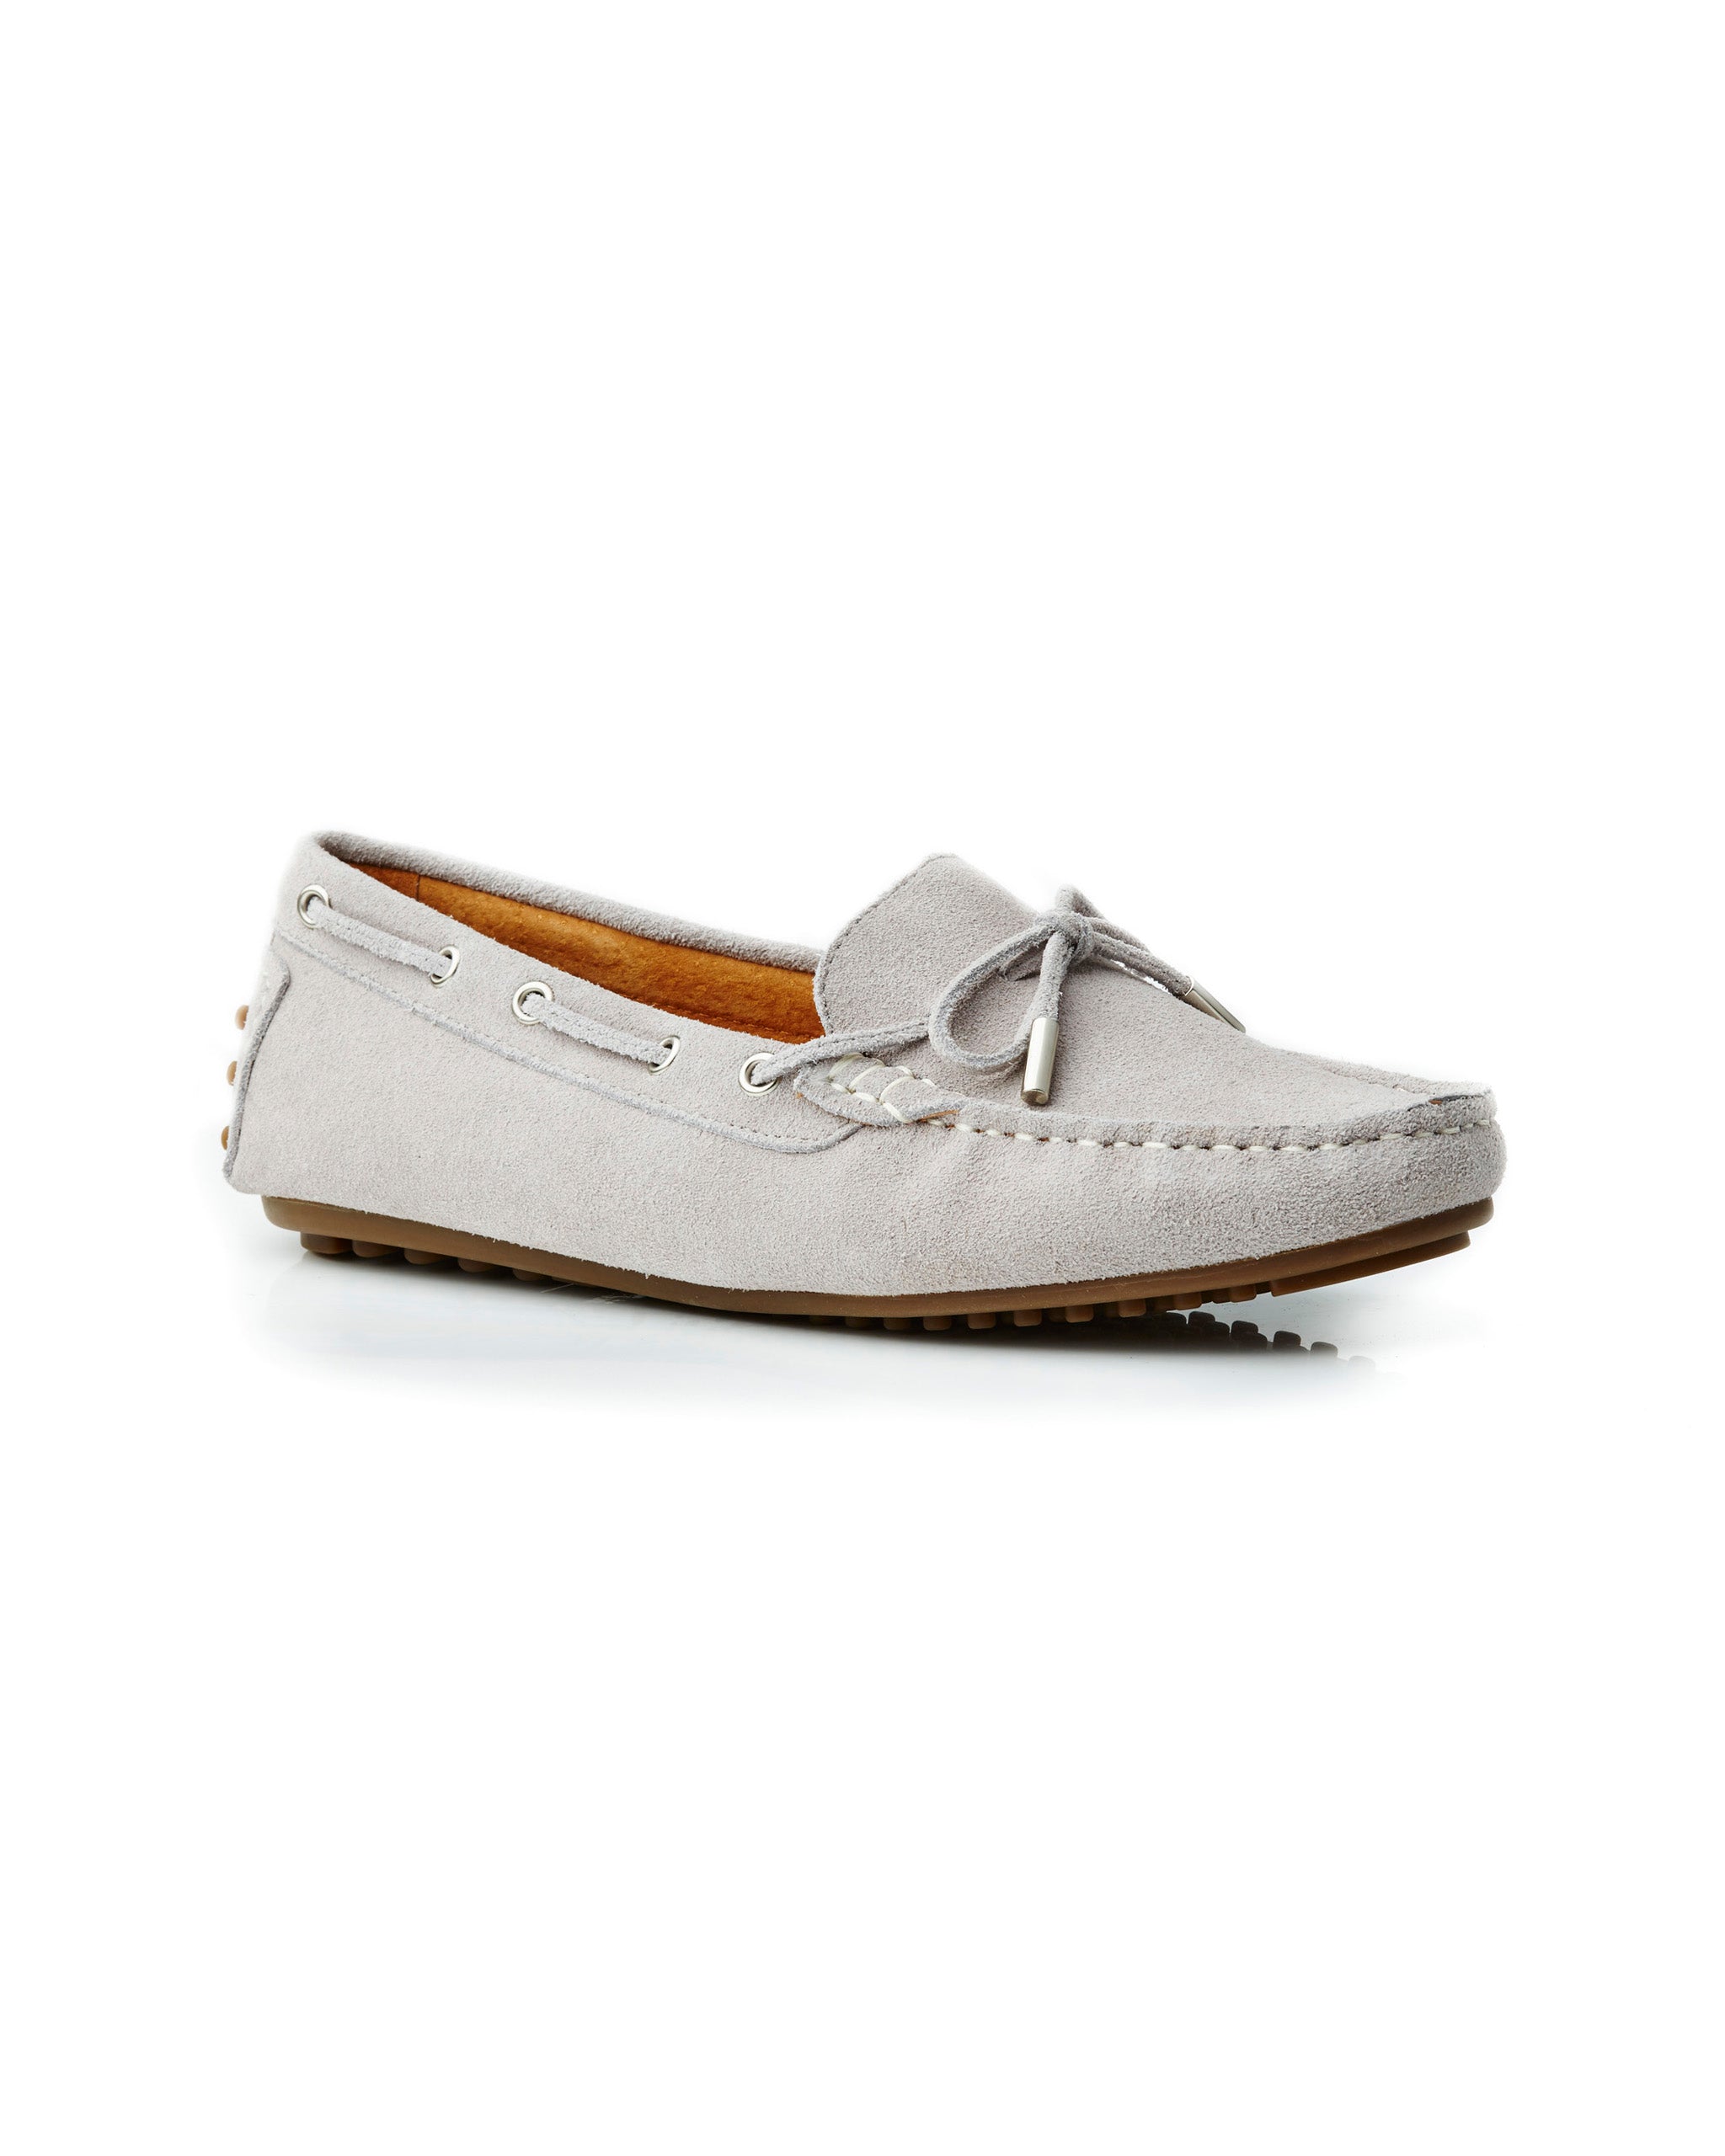 DARIA SUEDE LOAFER PALE GREY Side view